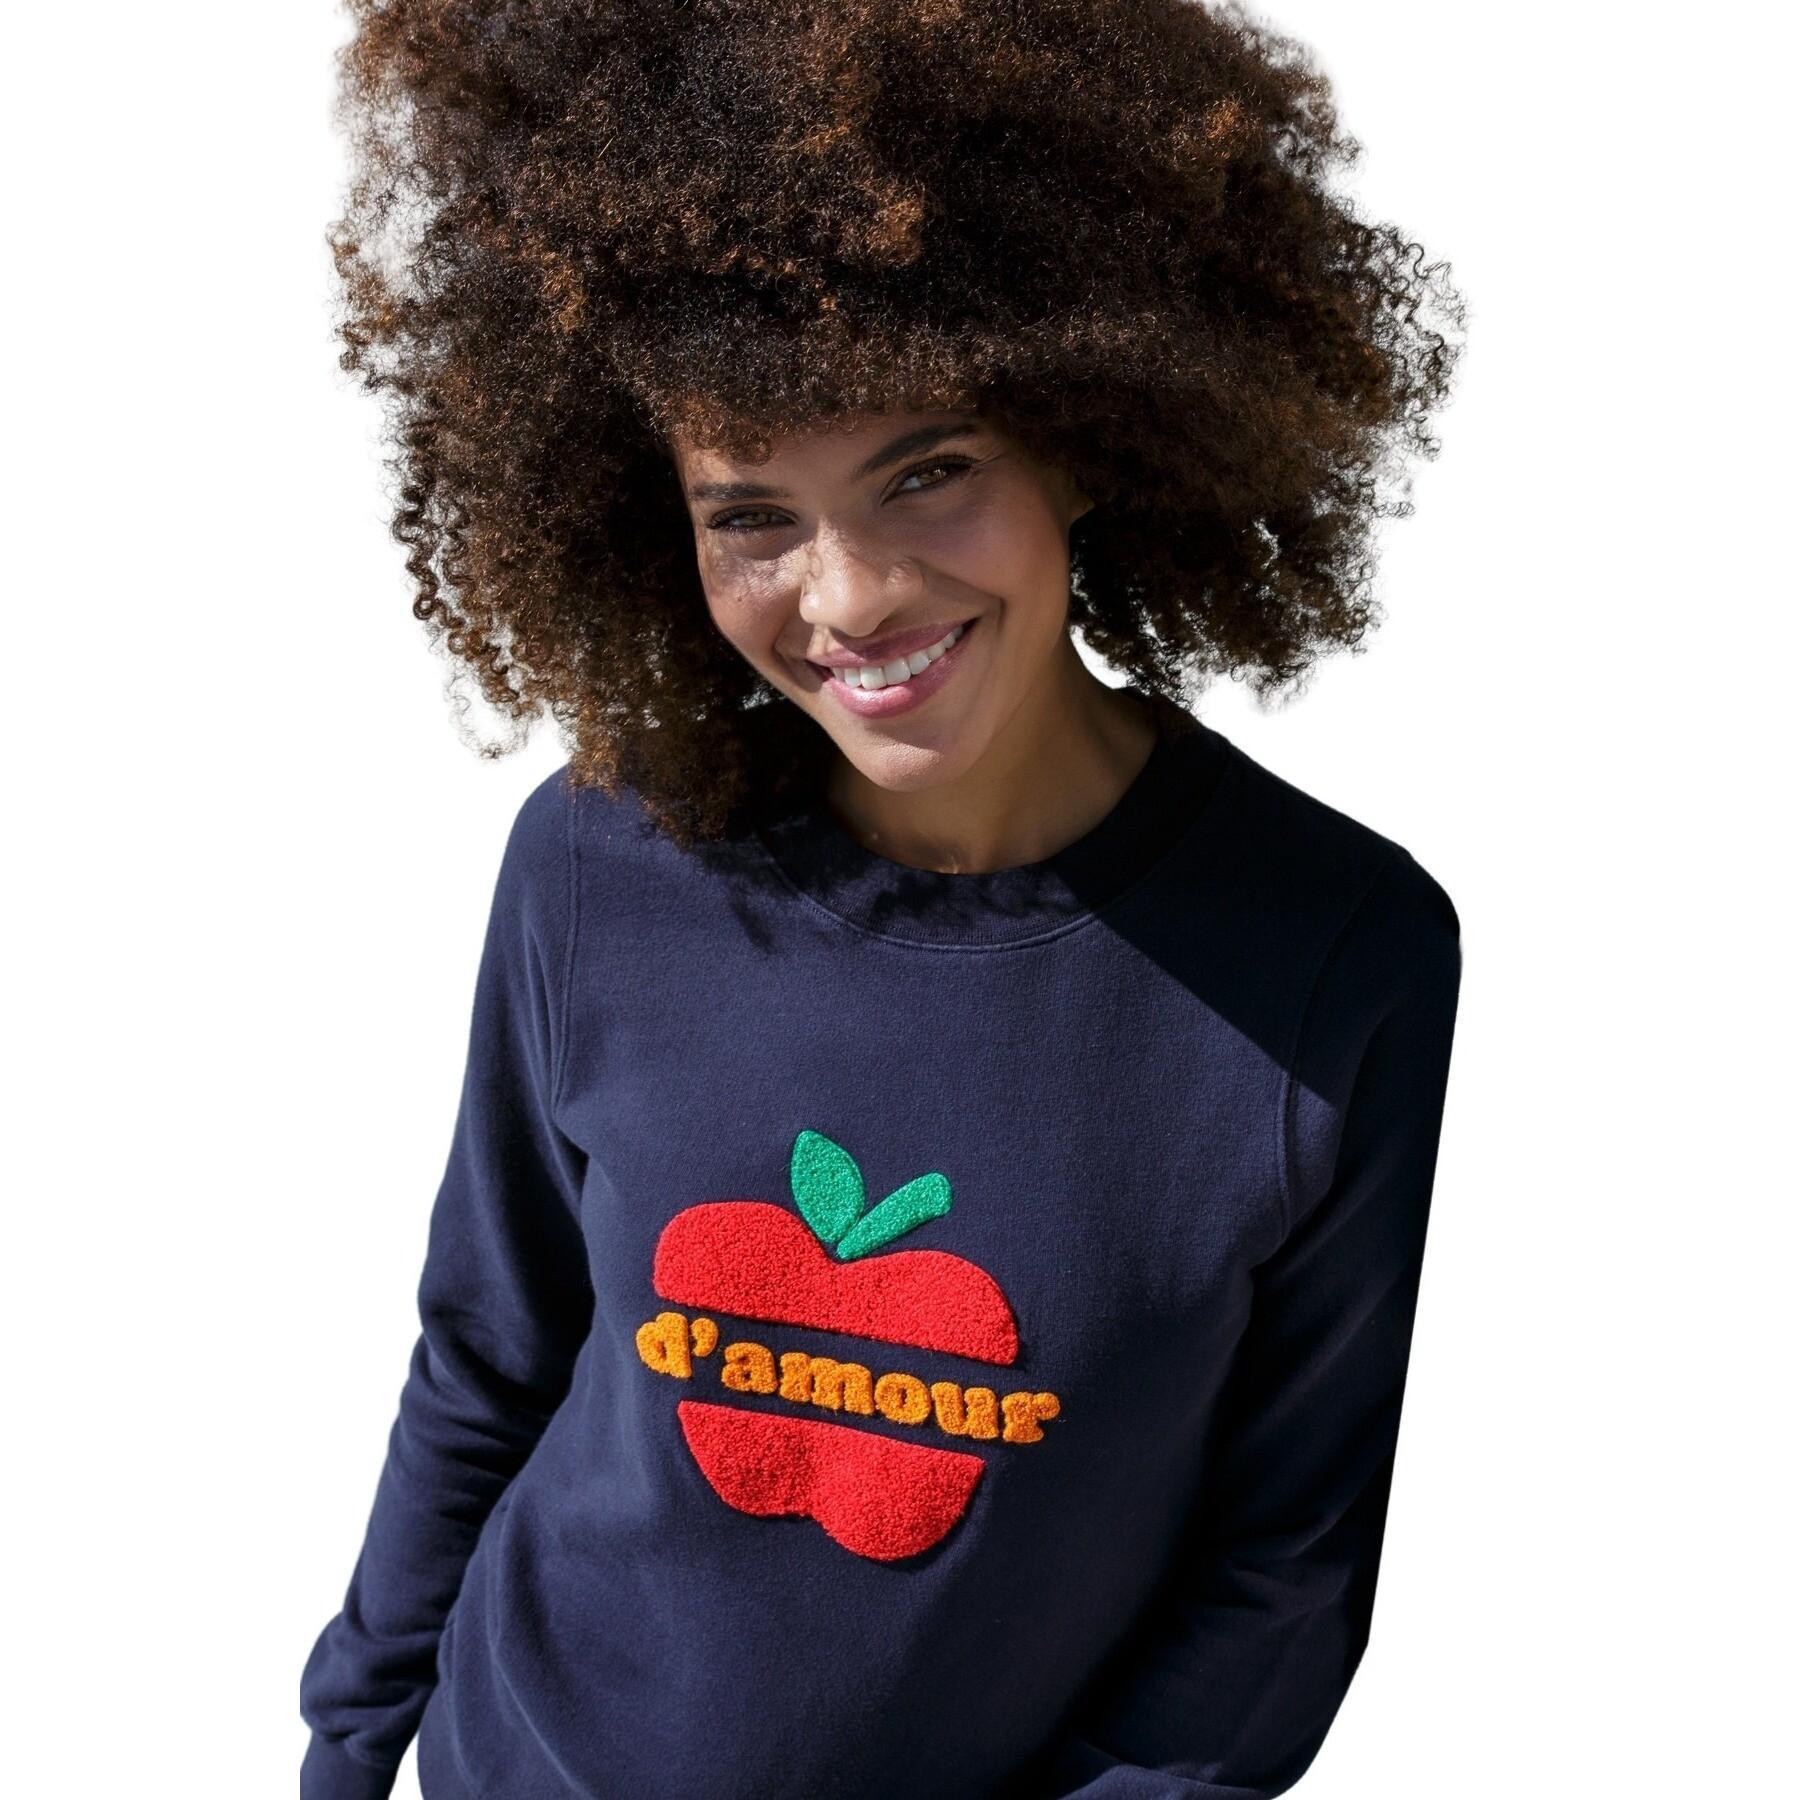 Sweatshirt femme French Disorder Jenny Pomme D'amour